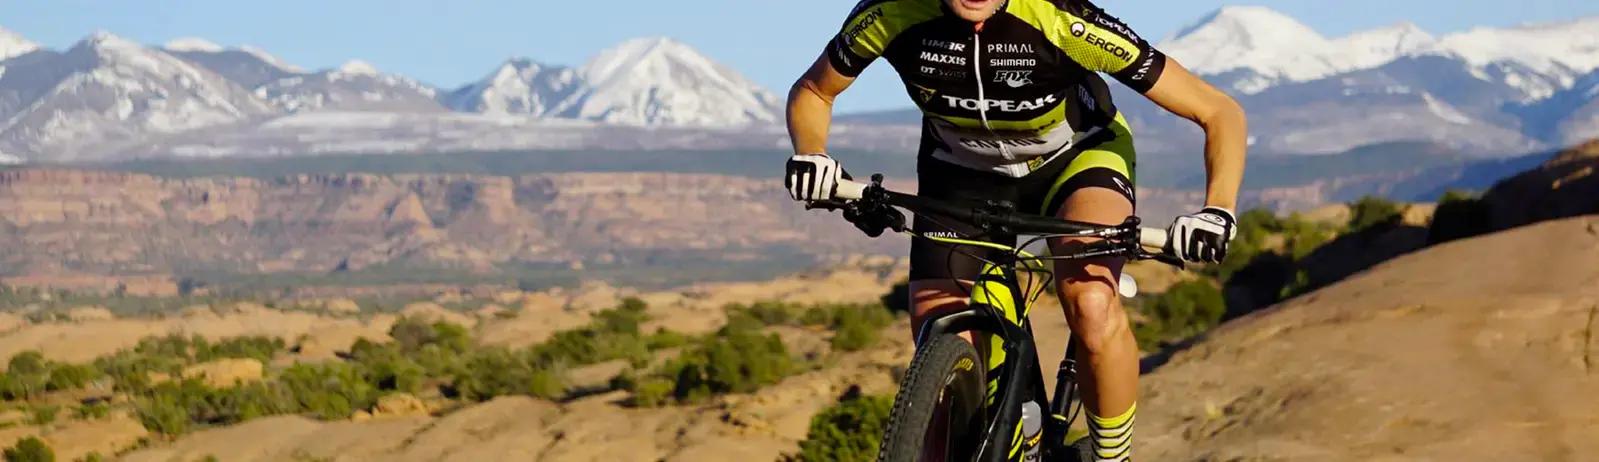 Mountain biker in desert with snow capped mountains in background